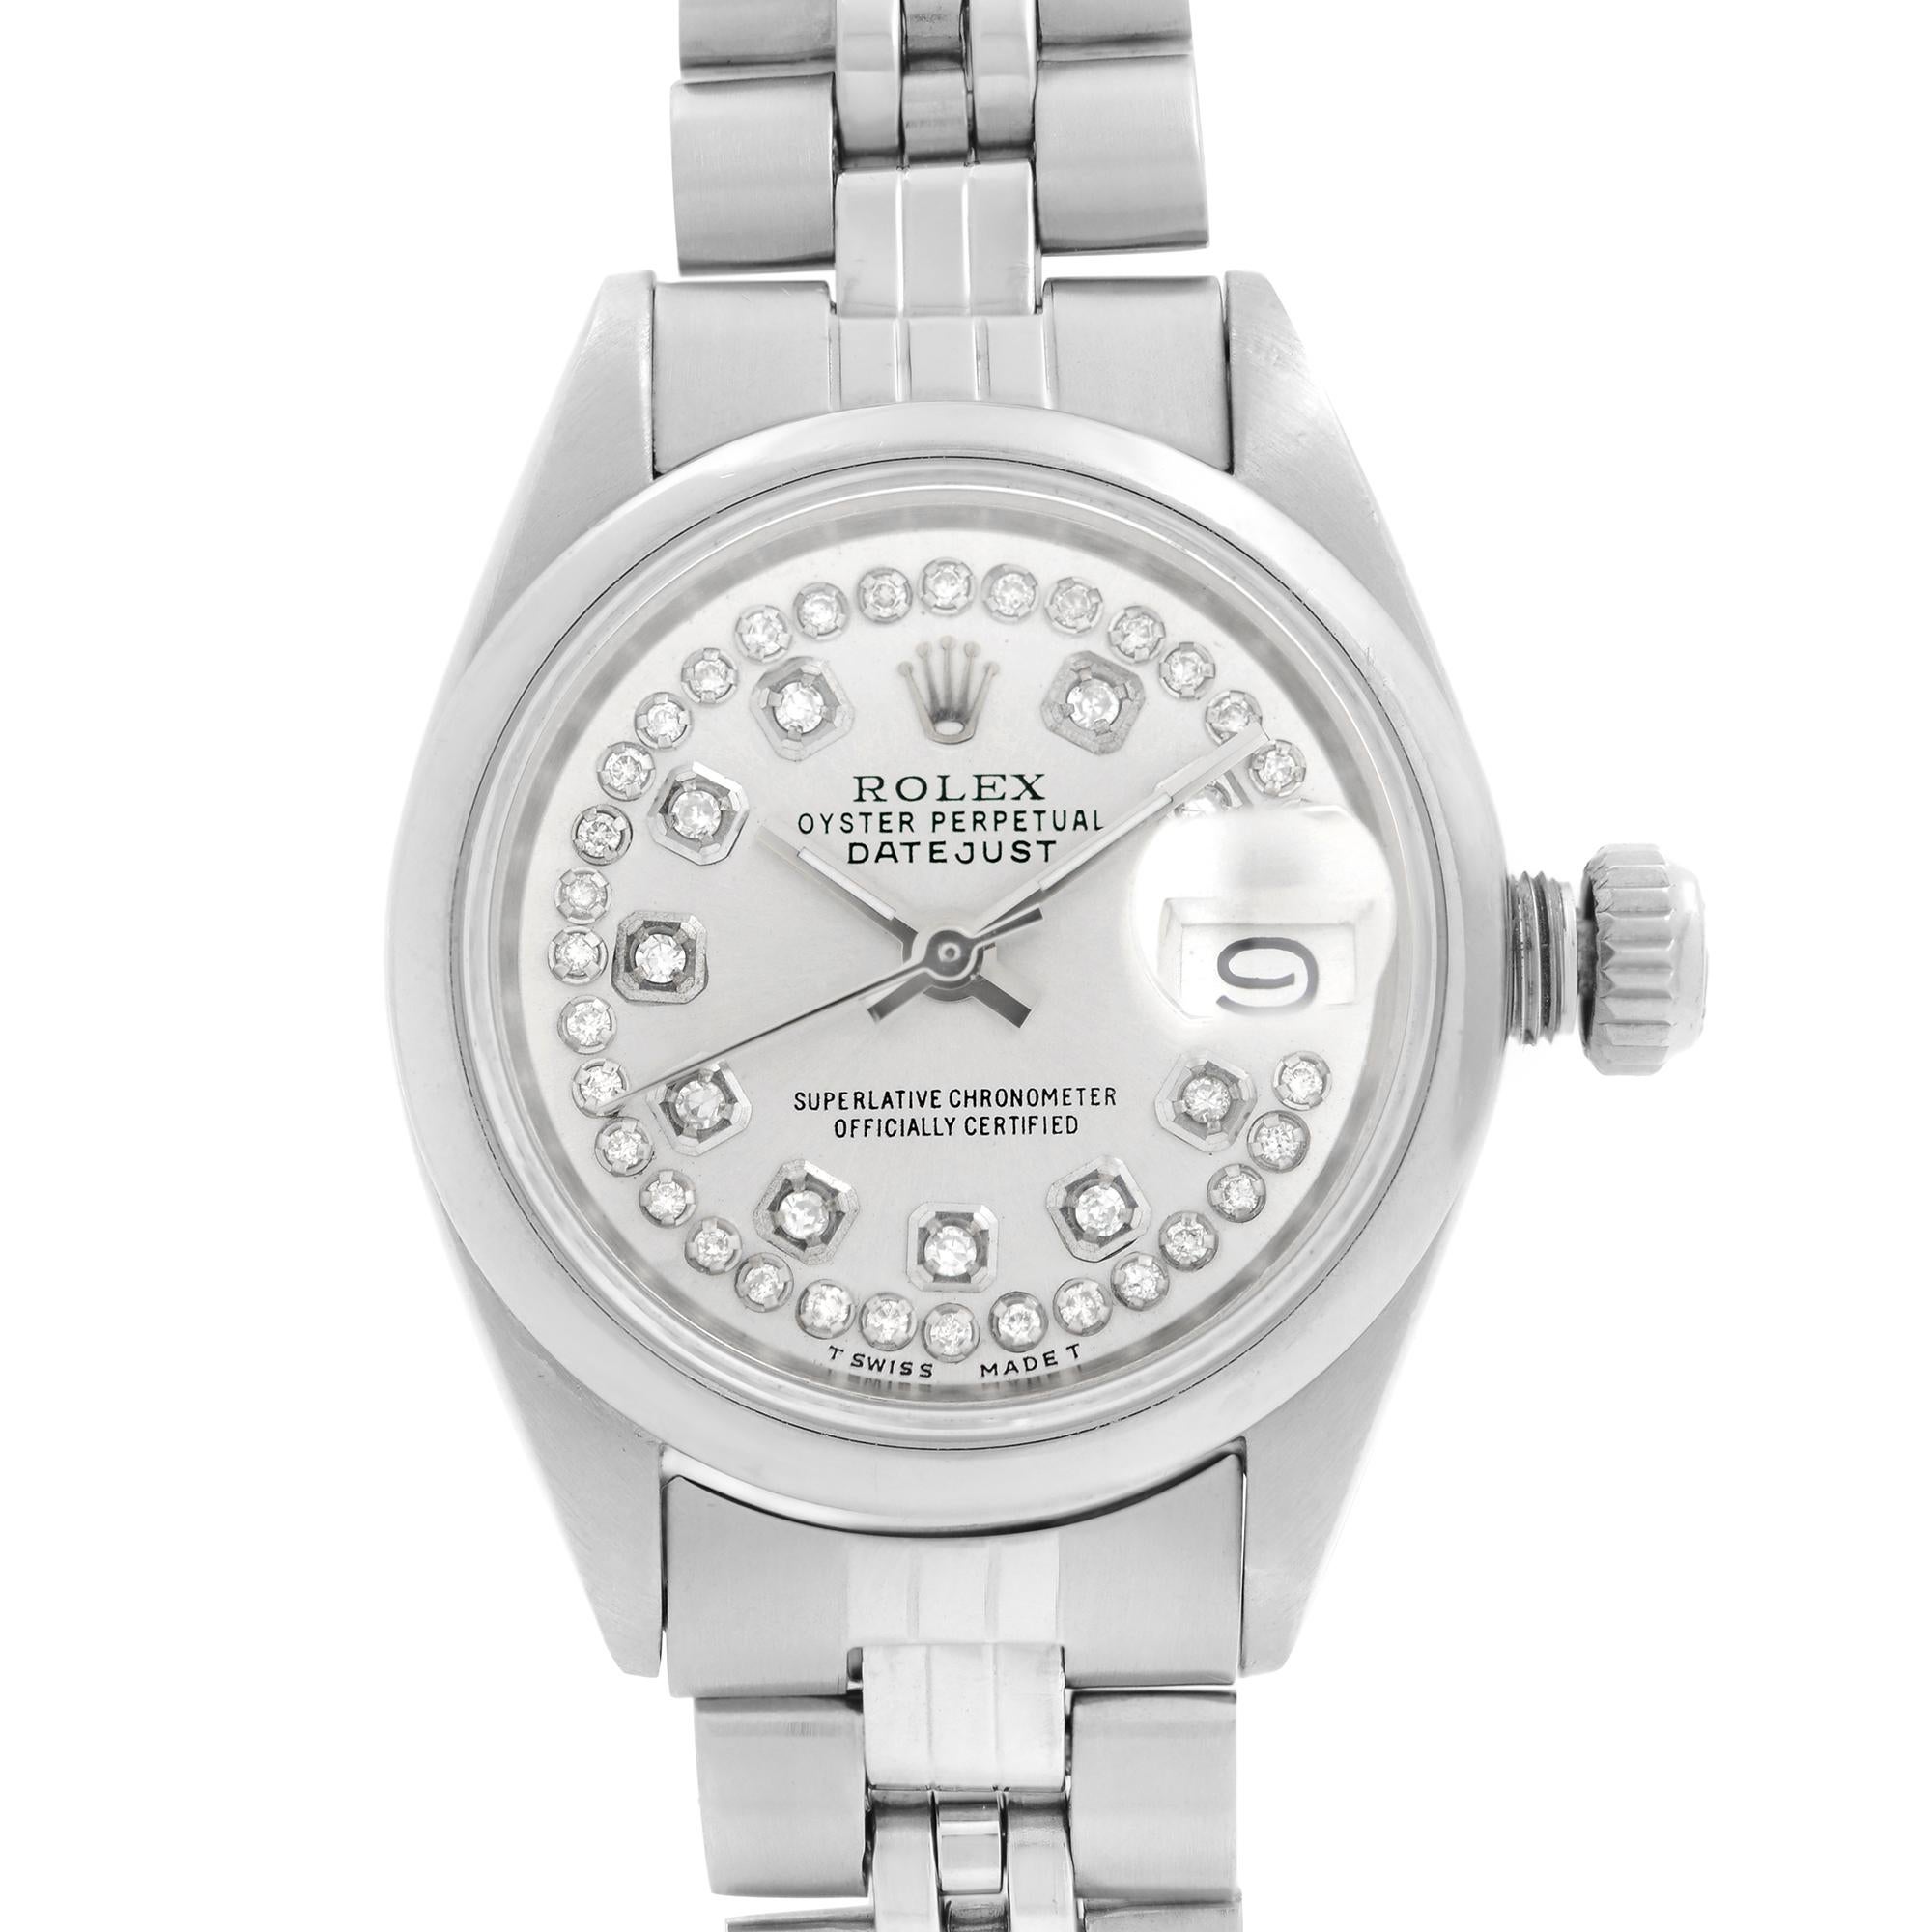 Pre-owned Vintage Rolex Datejust 26mm Steel Custom Diamond Silver Dial Automatic Ladies Watch 6916. Watch Was Produced in 1973. The Watch Band Has a Major Slack. The Case and Bezel Show Micro Dinges on the Edges. This Watch Has an Aftermarket Dial